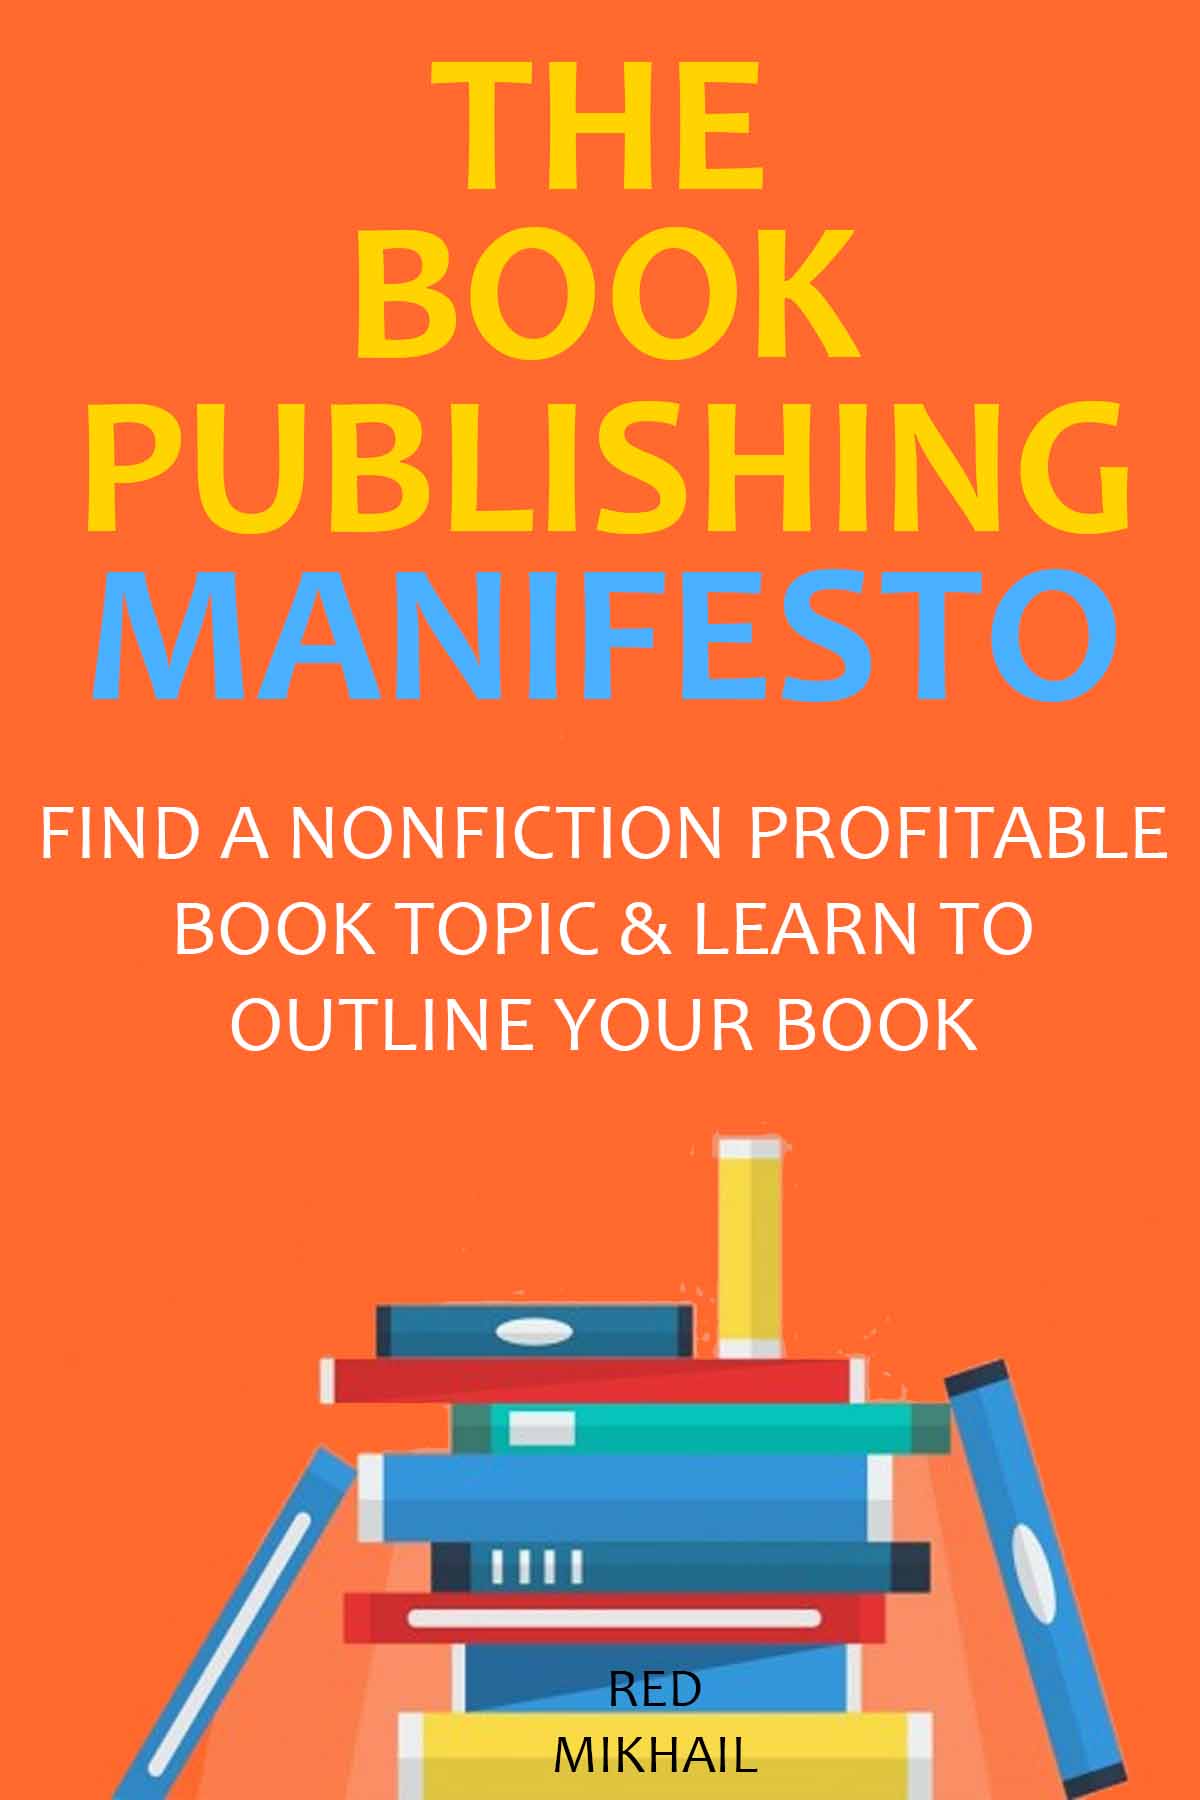 THE BOOK PUBLISHING MANIFESTO (2016 - 2 IN 1 BUNDLE): FIND A NONFICTION PROFITABLE BOOK TOPIC & LEARN TO OUTLINE YOUR BOOK